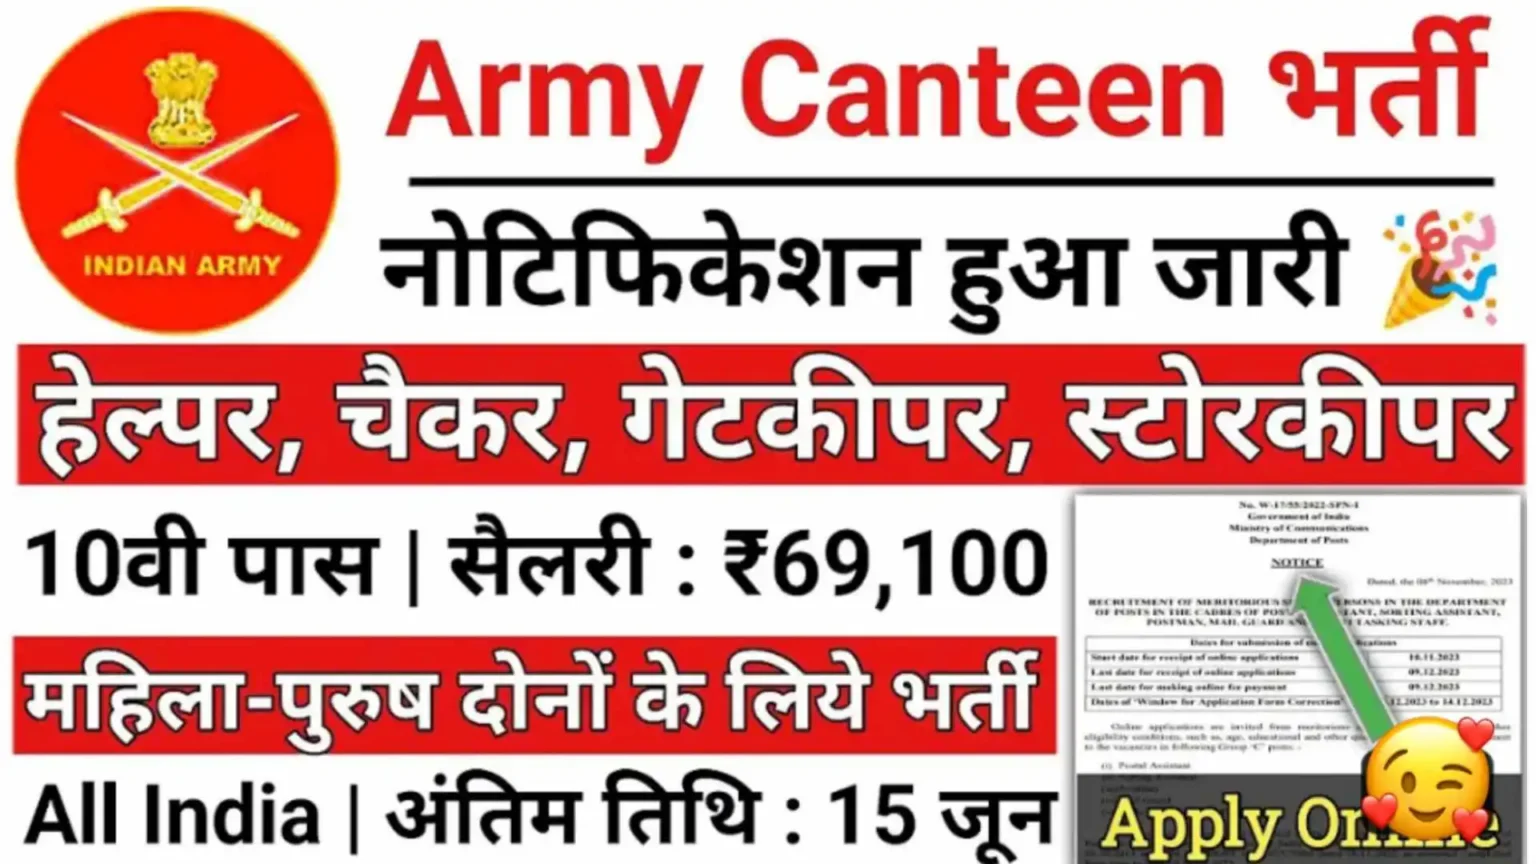 Army Canteen MTS Vacancy: 12th Pass Bumper Posts Apply Here